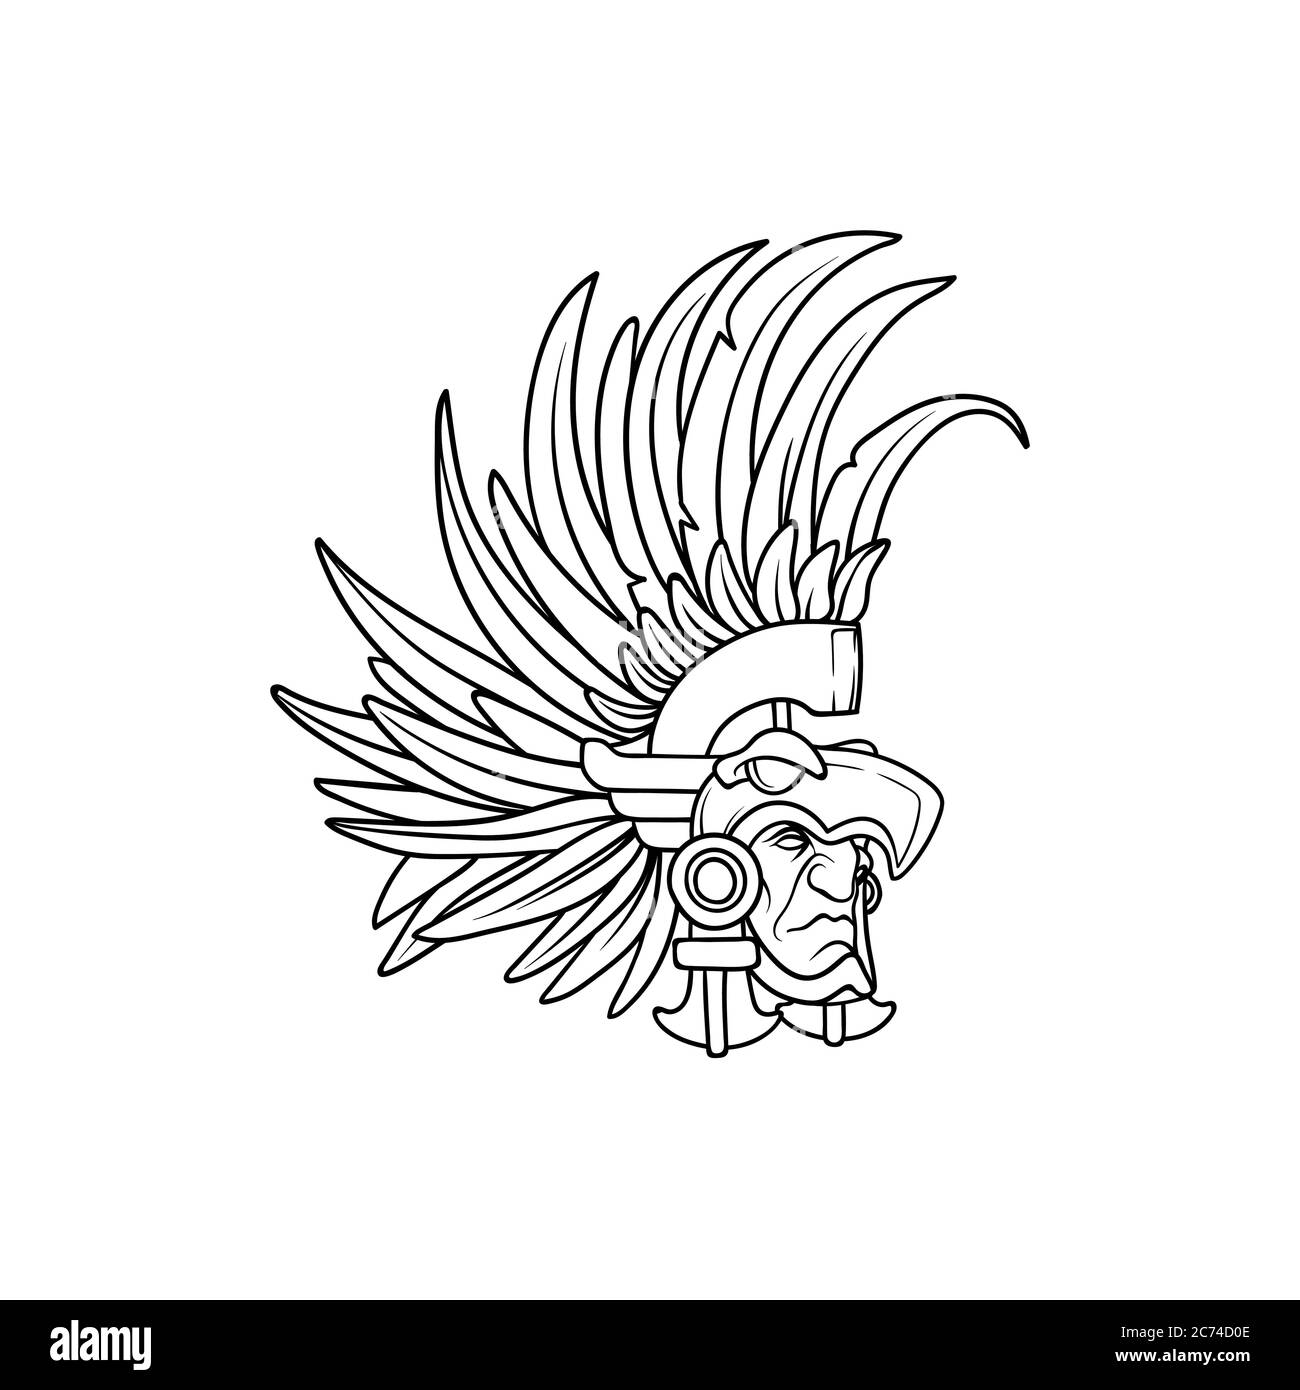 Amazing outline of an aztec elite warrior wearing an eagle helmet with feathers Stock Vector